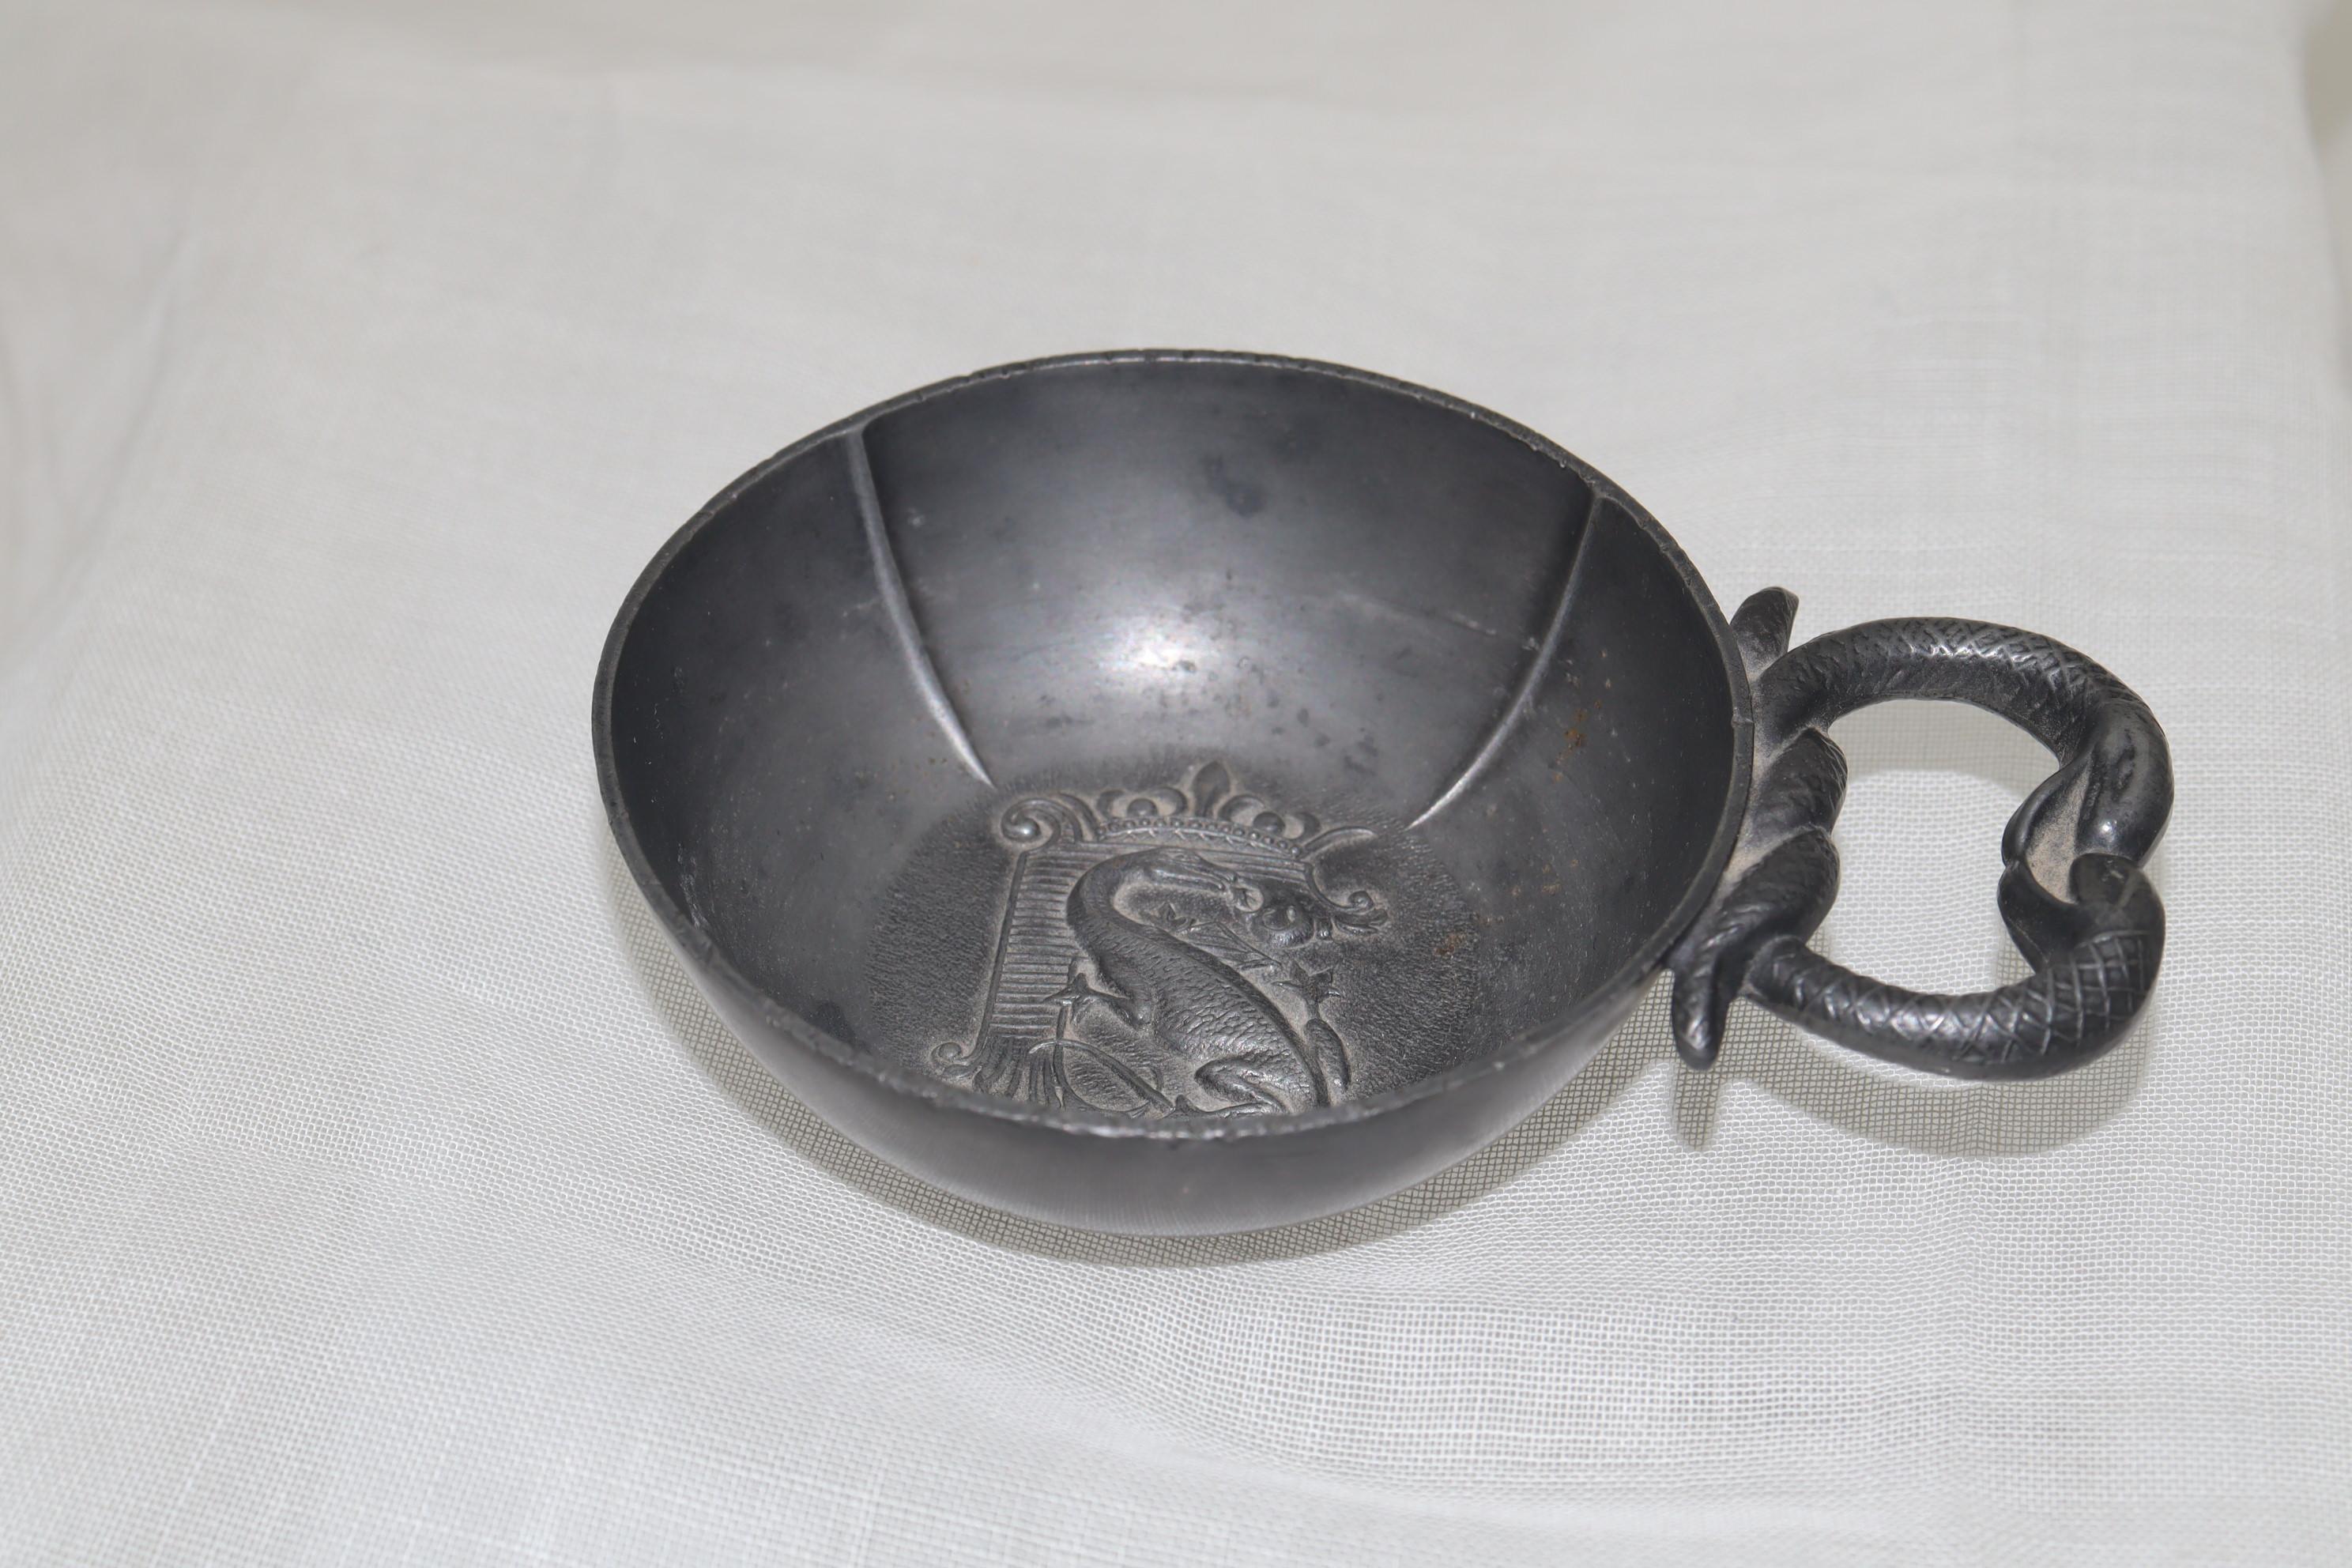 This good quality French pewter wine taster features a coat of arms to the centre, which consists of a fire-breathing salamander entwined around the letter F to the centre, all below a crown. This device was the emblem of Francois 1 of France who